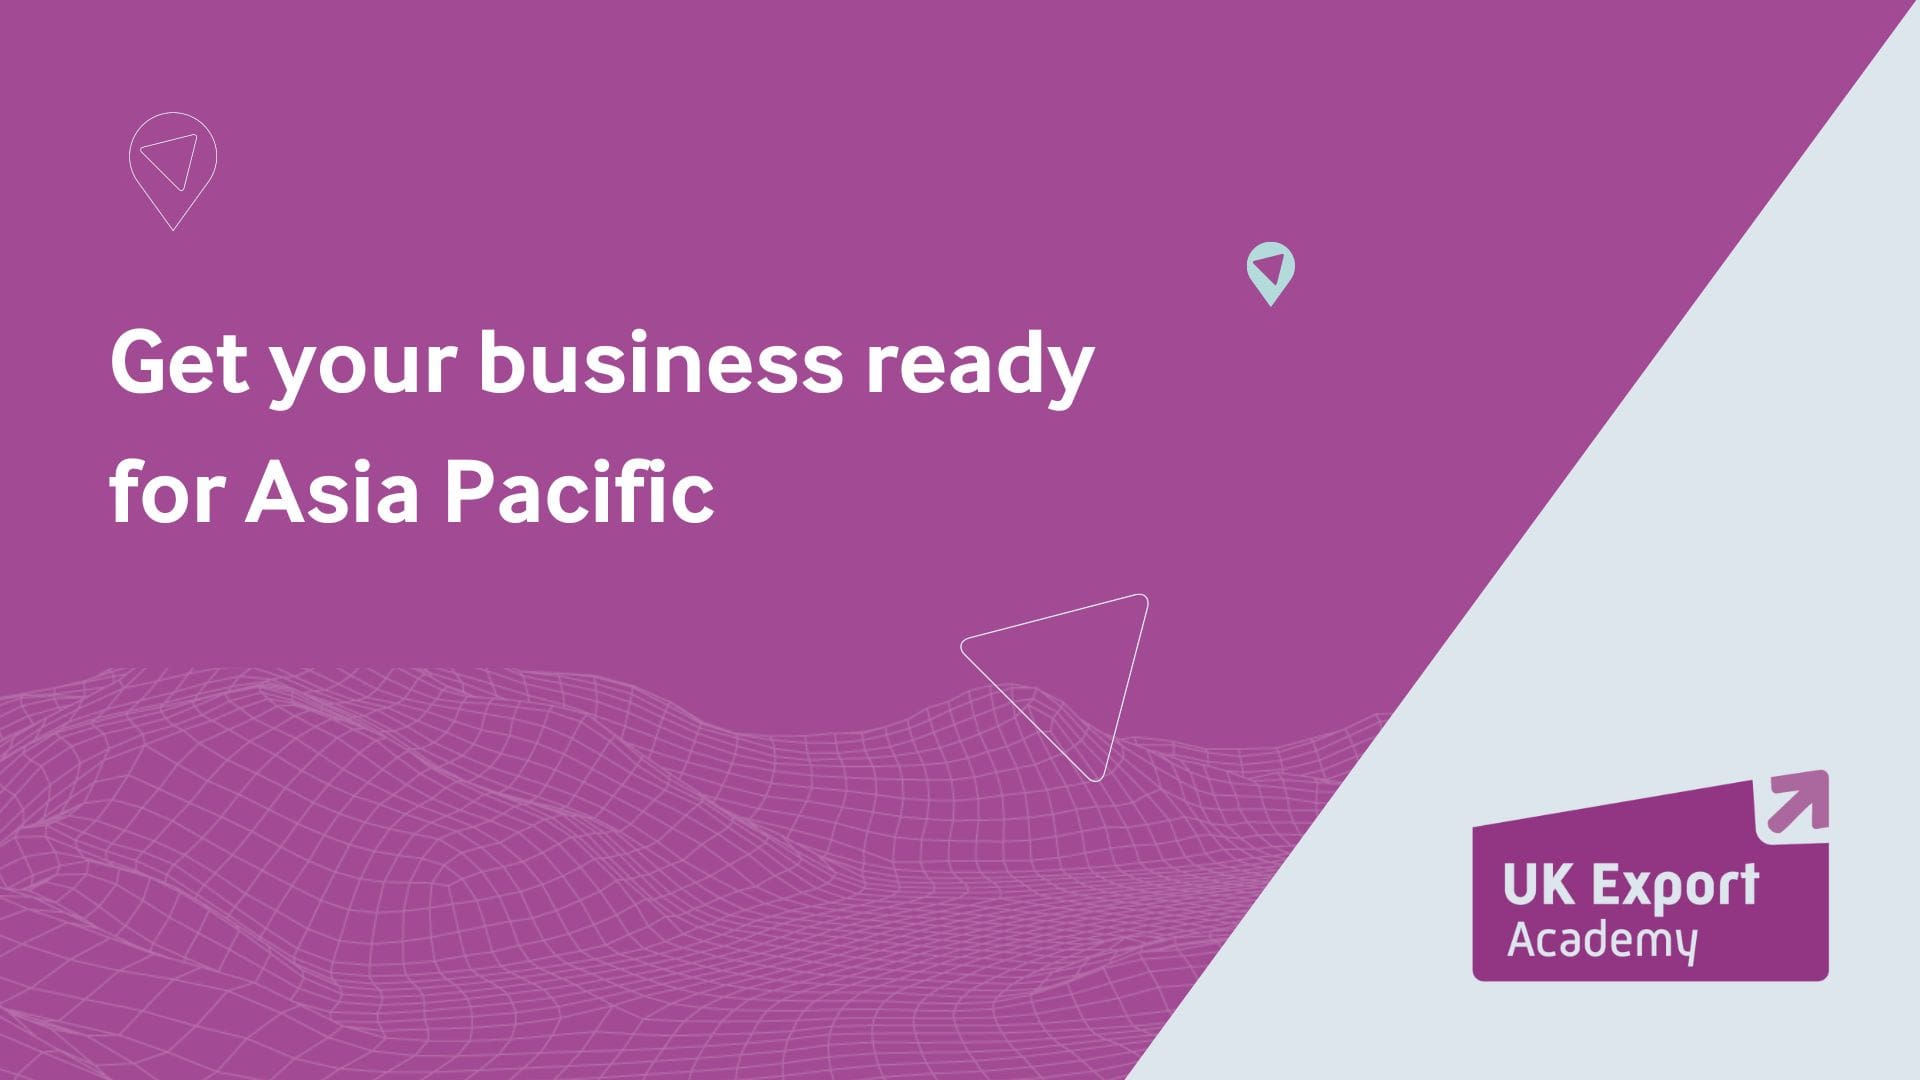 Get your business ready for Asia Pacific